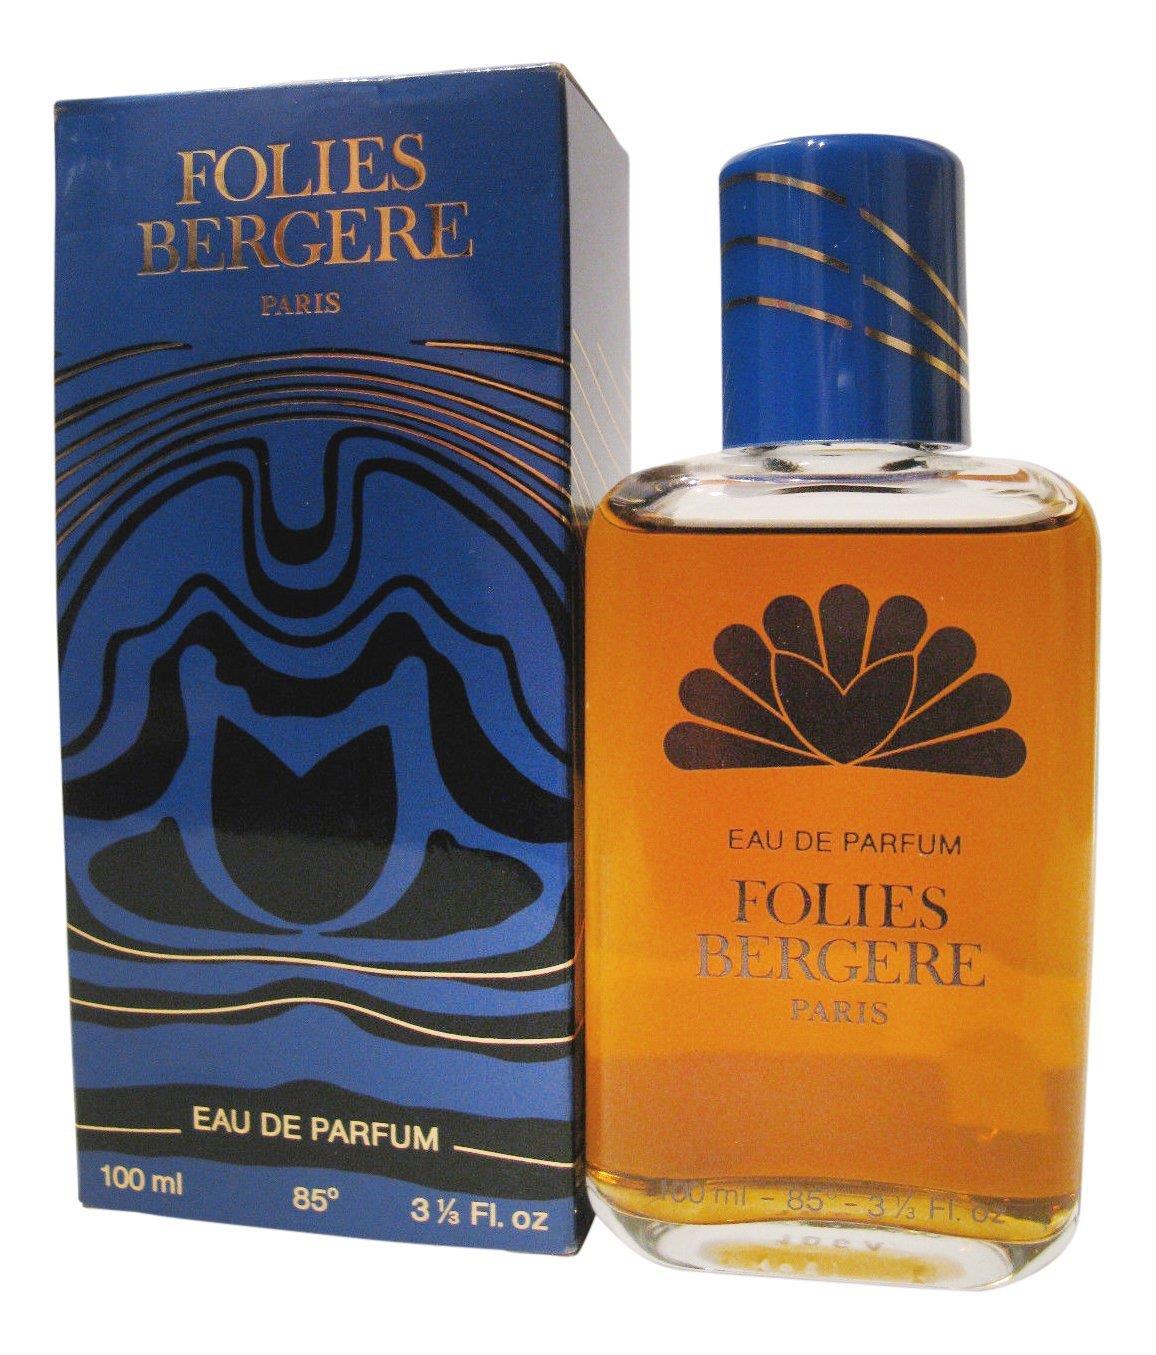 Buy Folies Bergere Pure Parfum - Decanted Fragrances and Perfume Samples -  The Perfumed Court